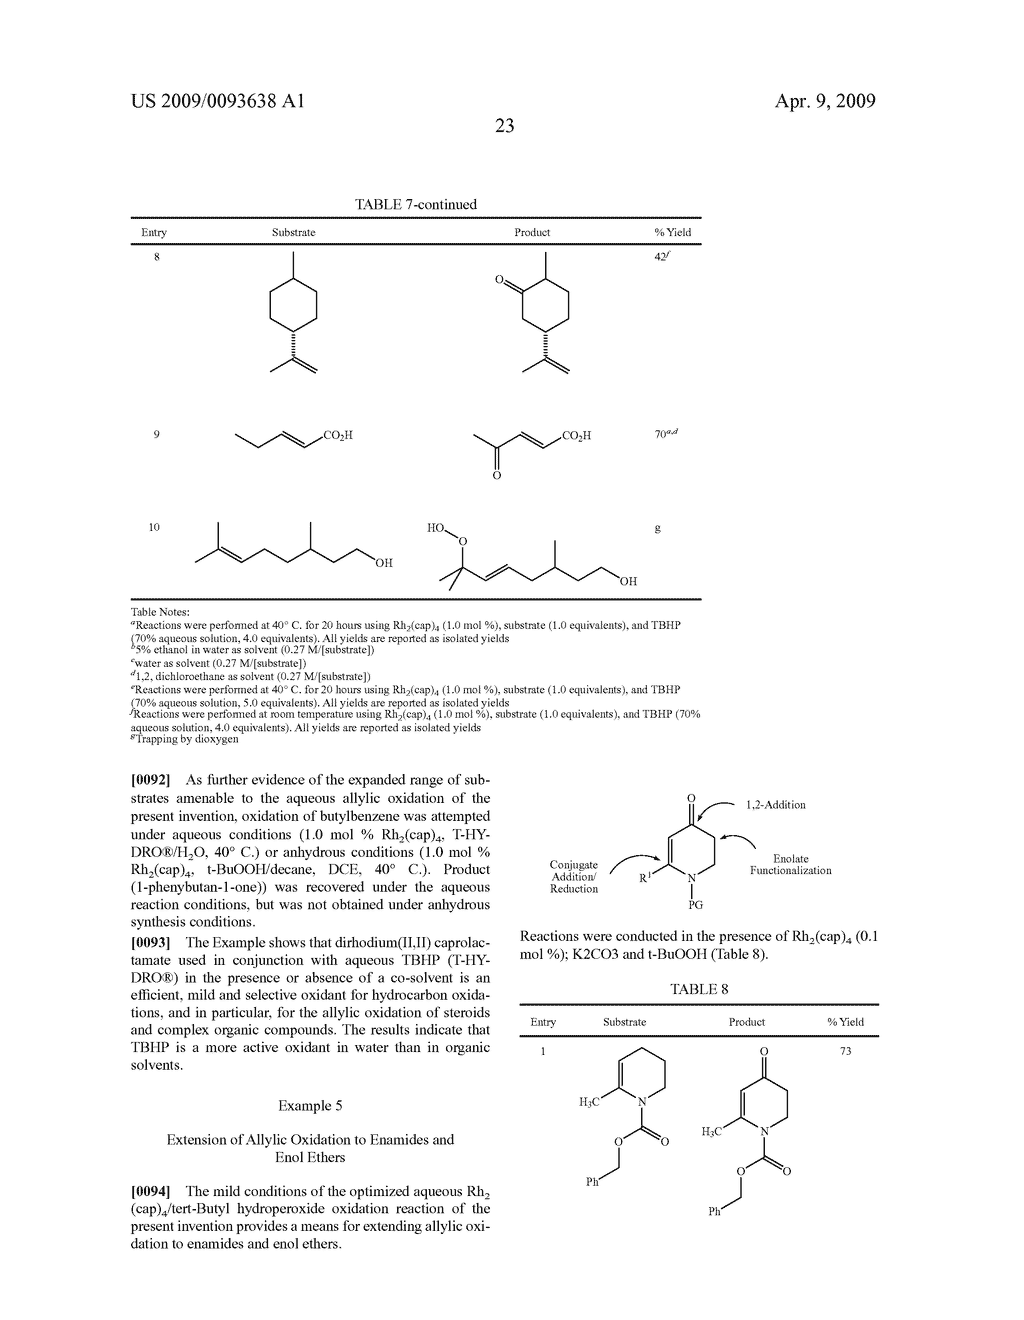 Allylic Oxidations Catalyzed by Dirhodium Catalysts under Aqueous Conditions - diagram, schematic, and image 28